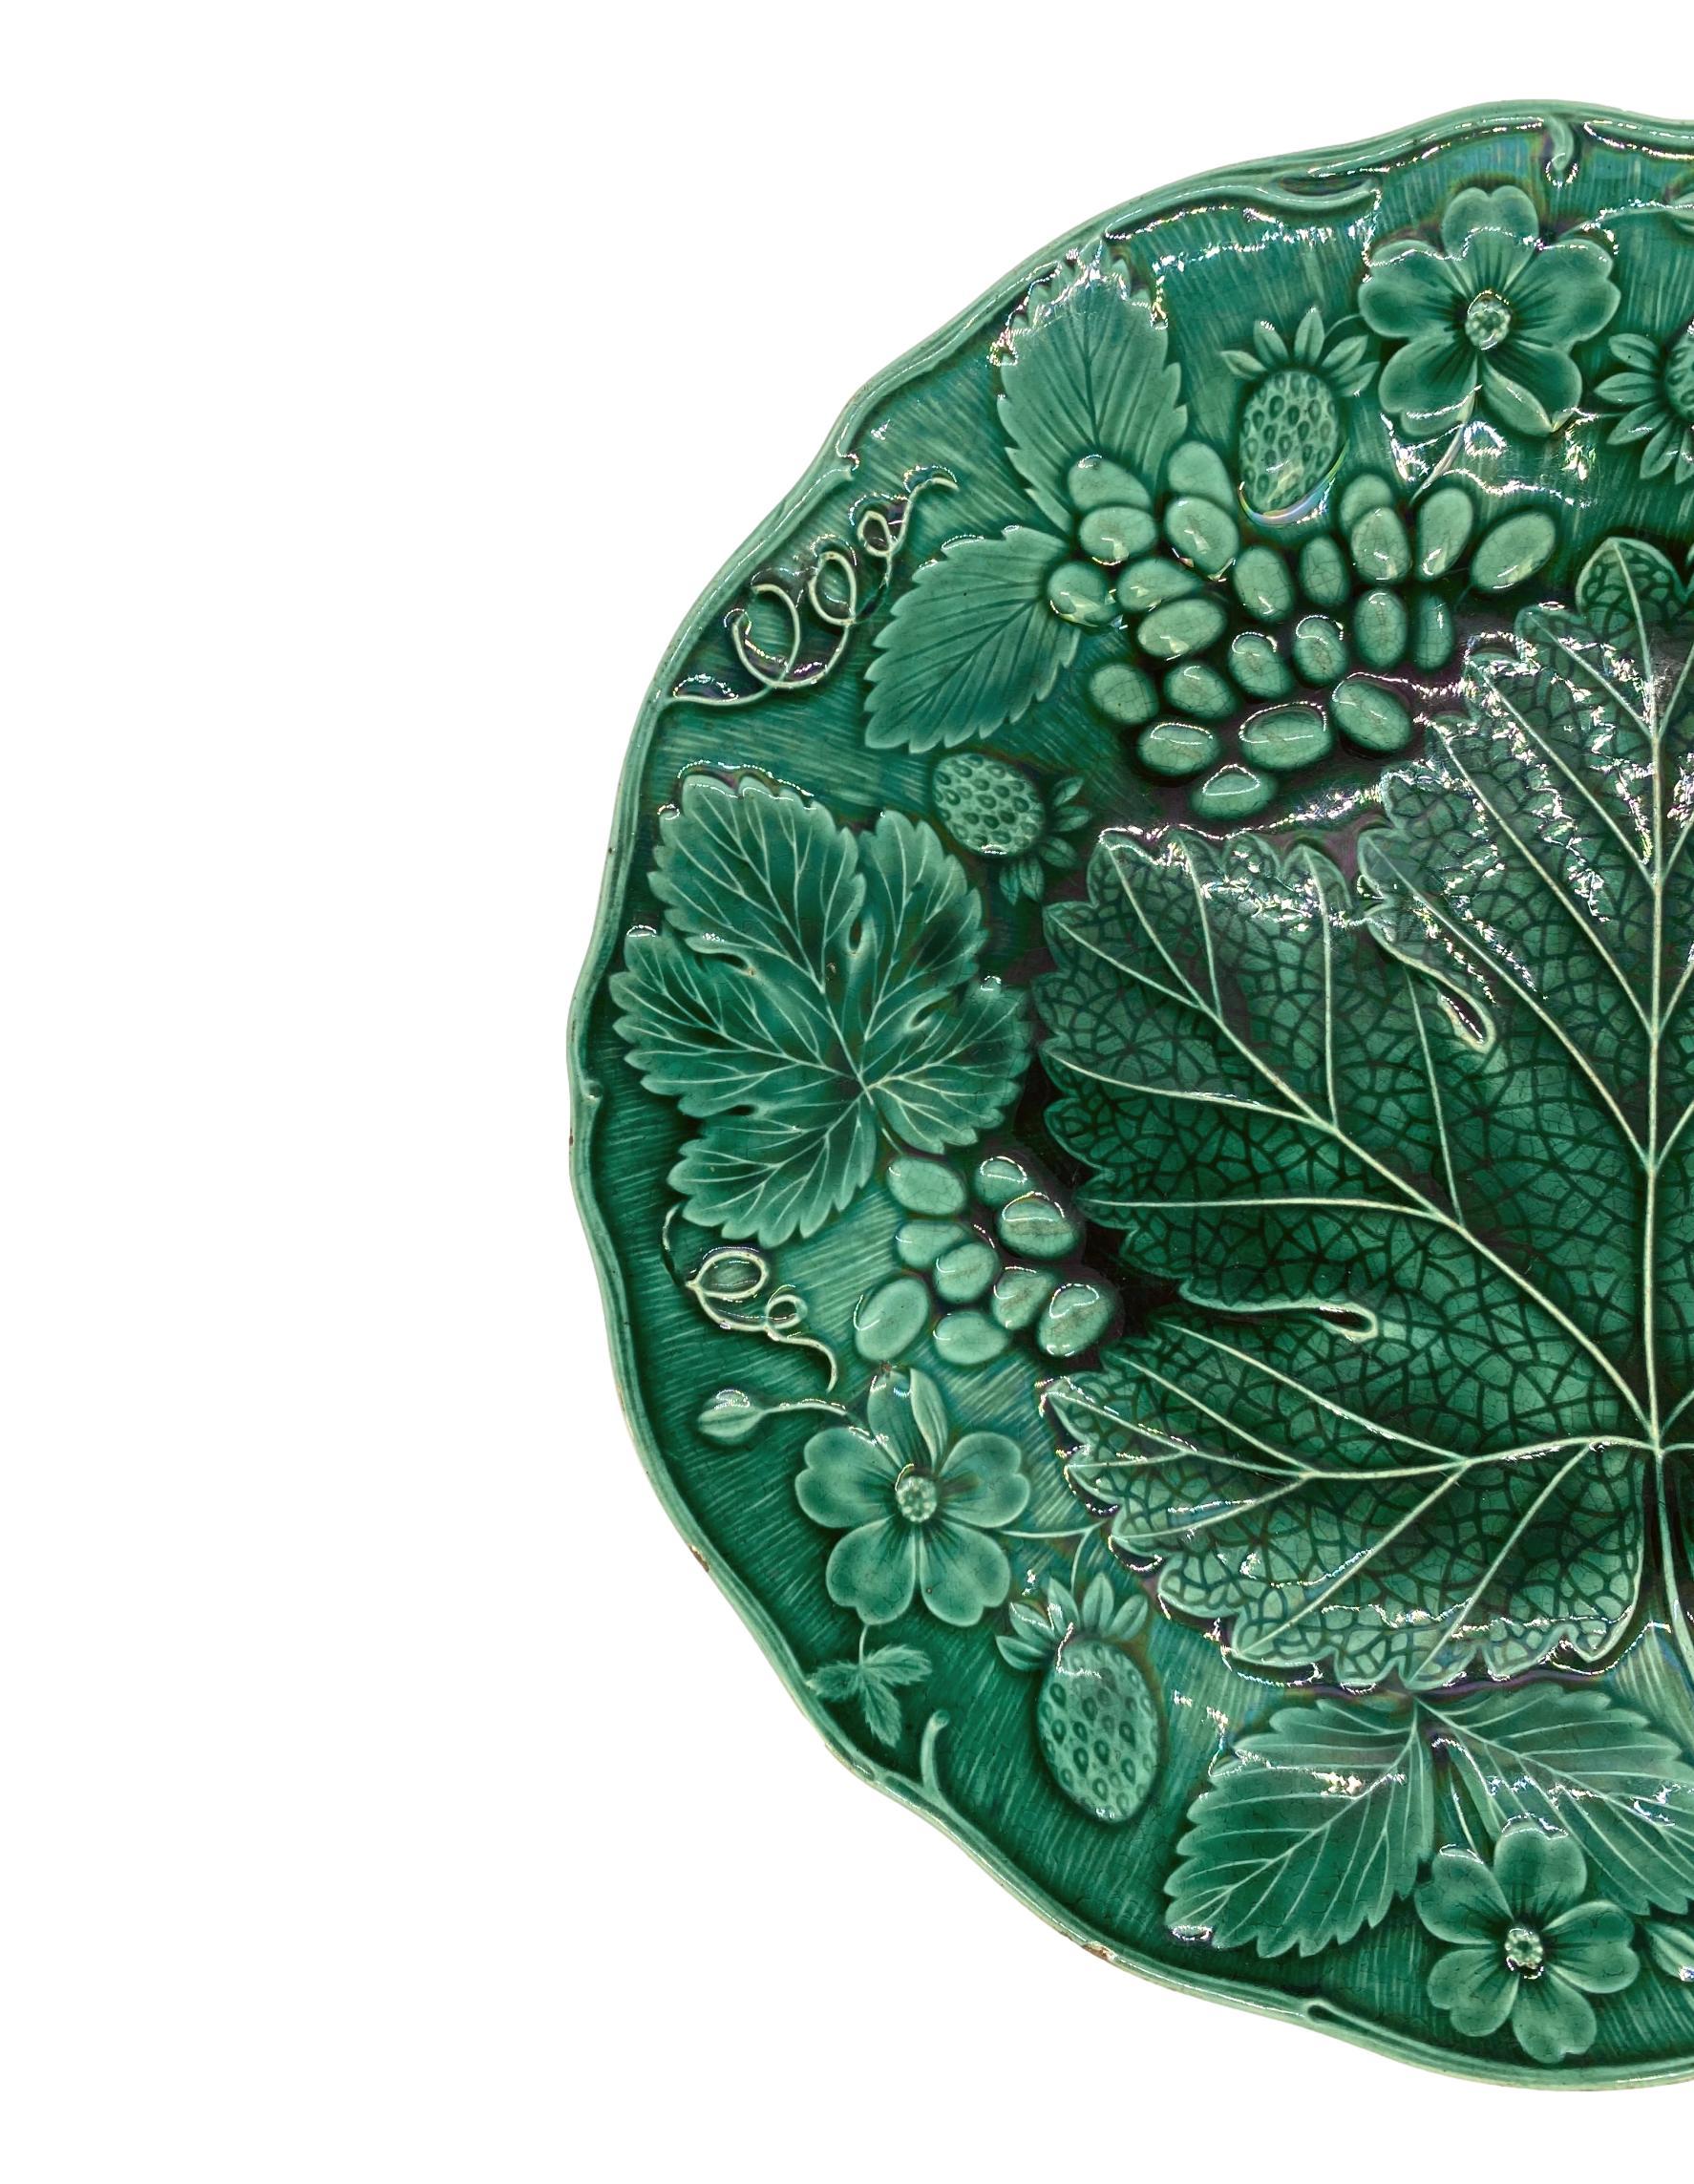 Green Majolica strawberry dessert plate, English, molded with strawberries and grapes, English, ca. 1880.